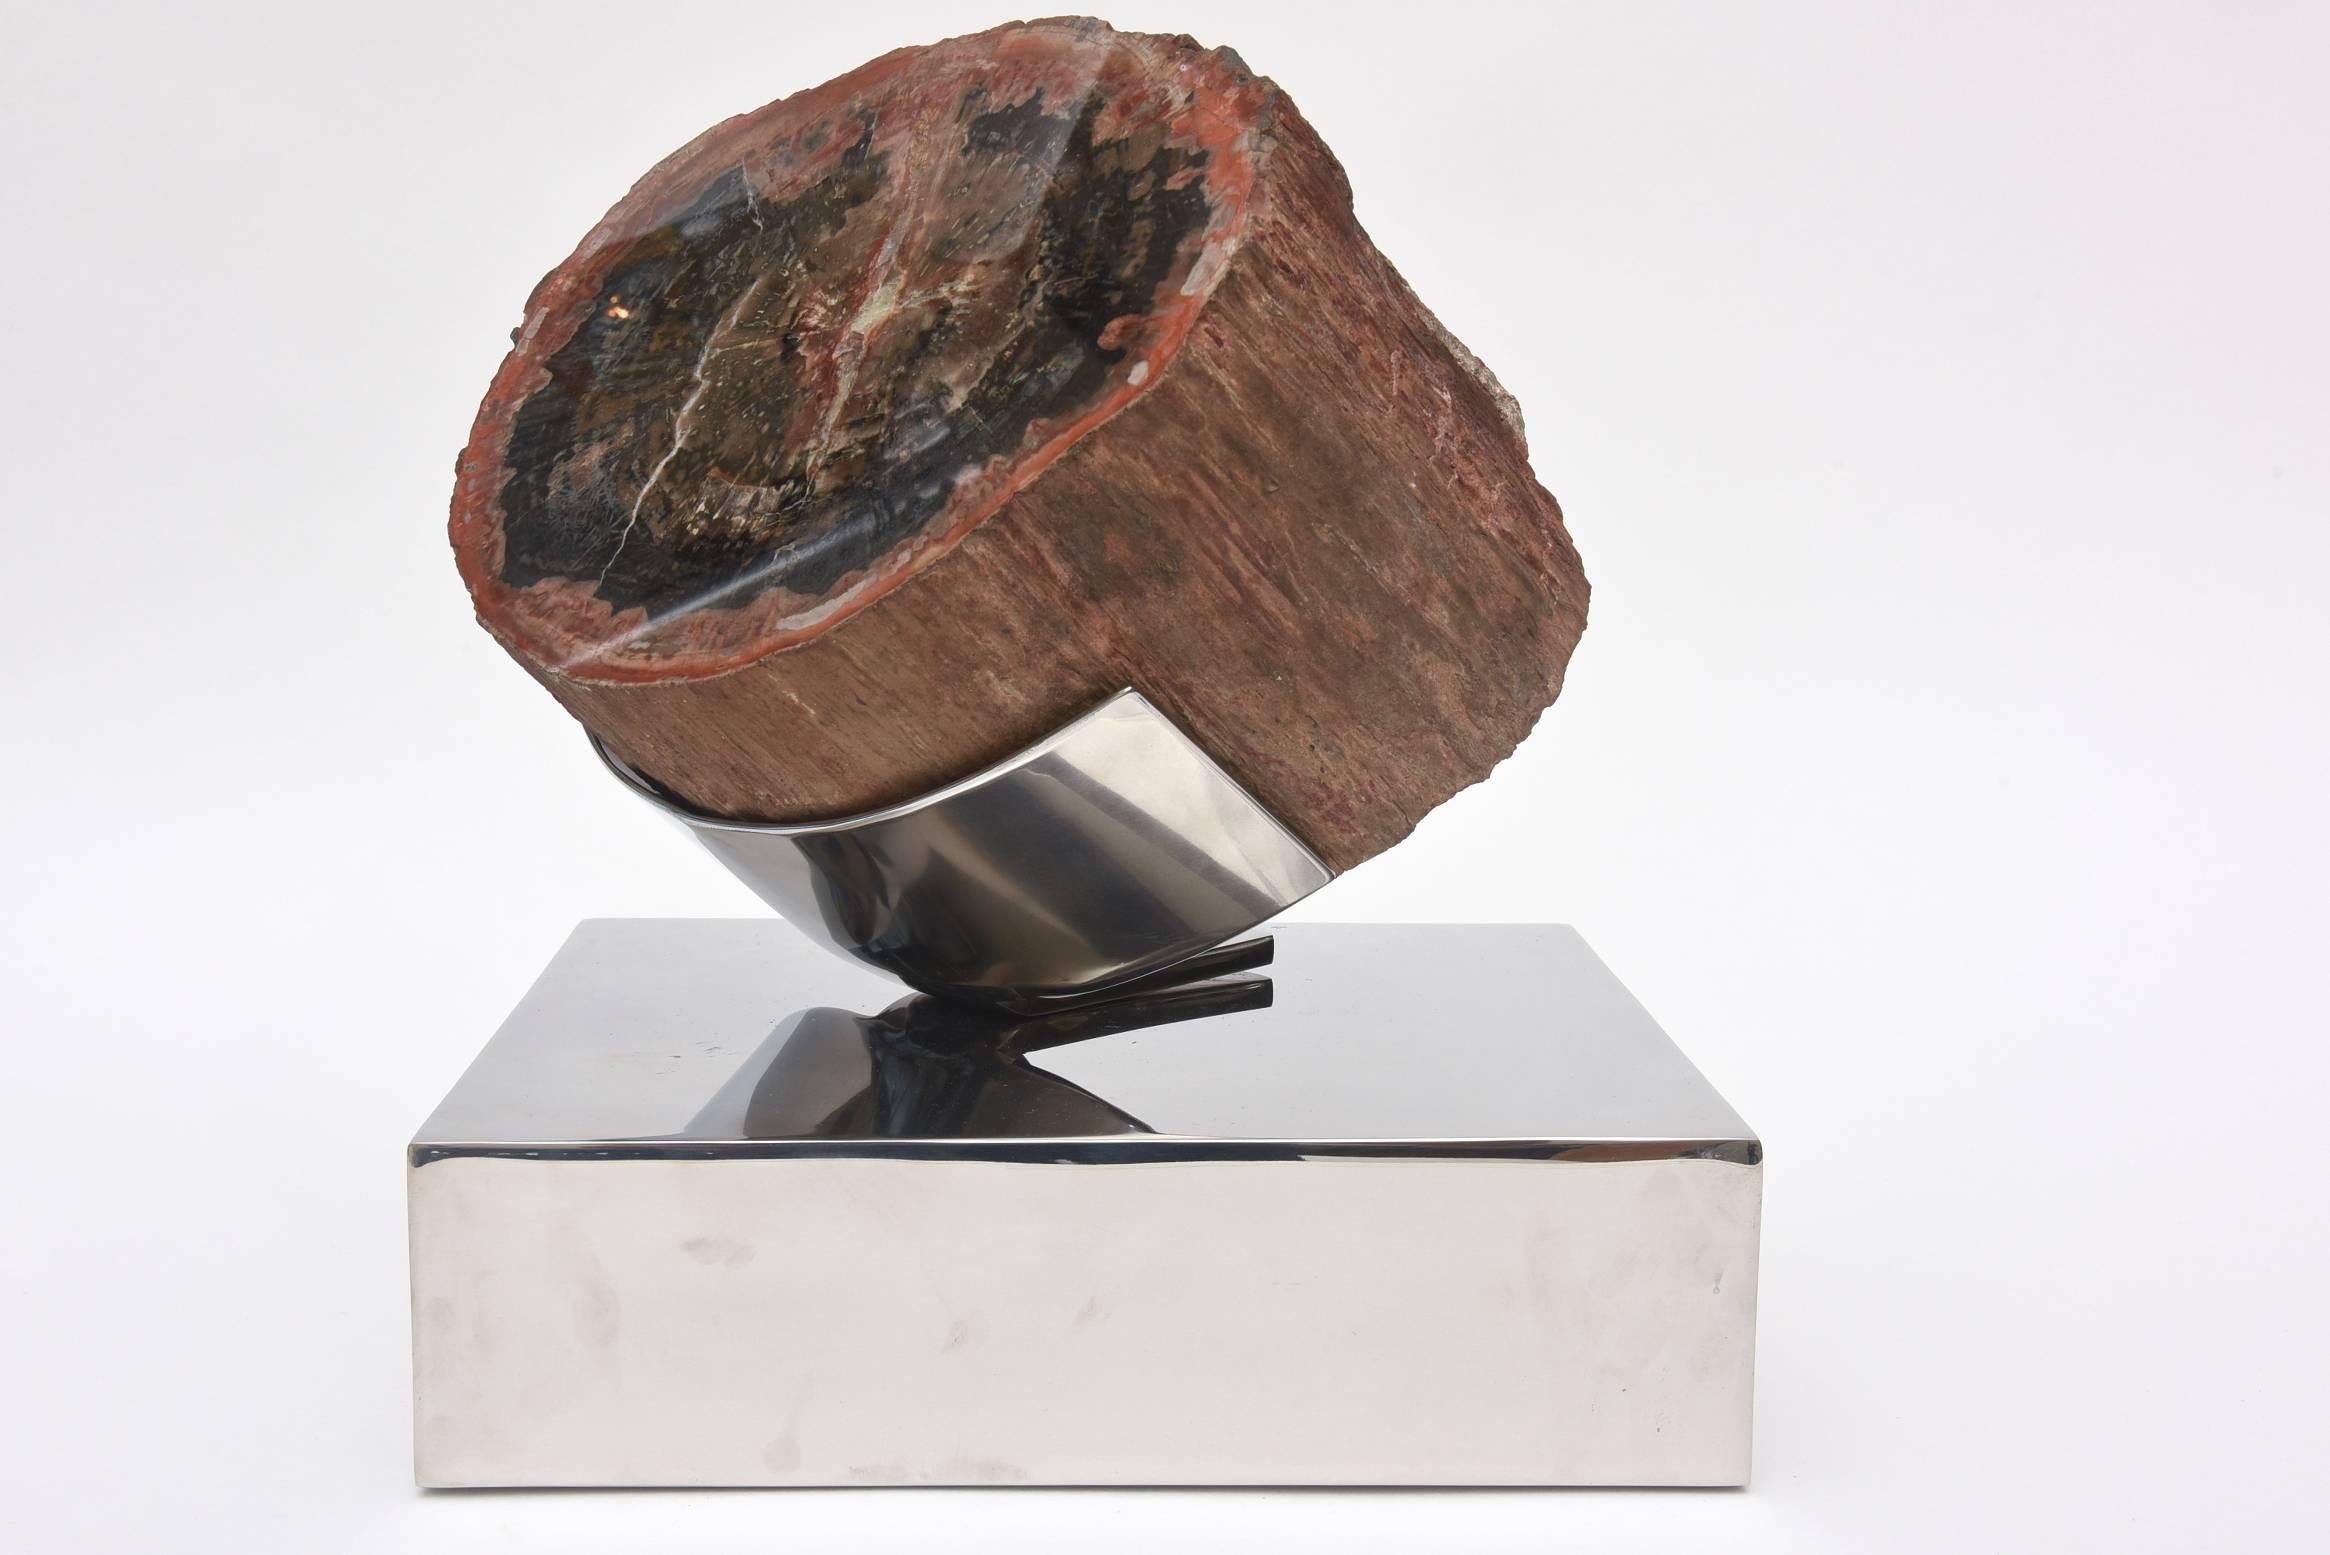 This gorgeous hunk of petrified wood from Arizona dates back to 180 million years old. It is from a Madison Ave gallery no longer existing and belonged to an important art and antique collector from Latin America. The stunning custom stainless steel